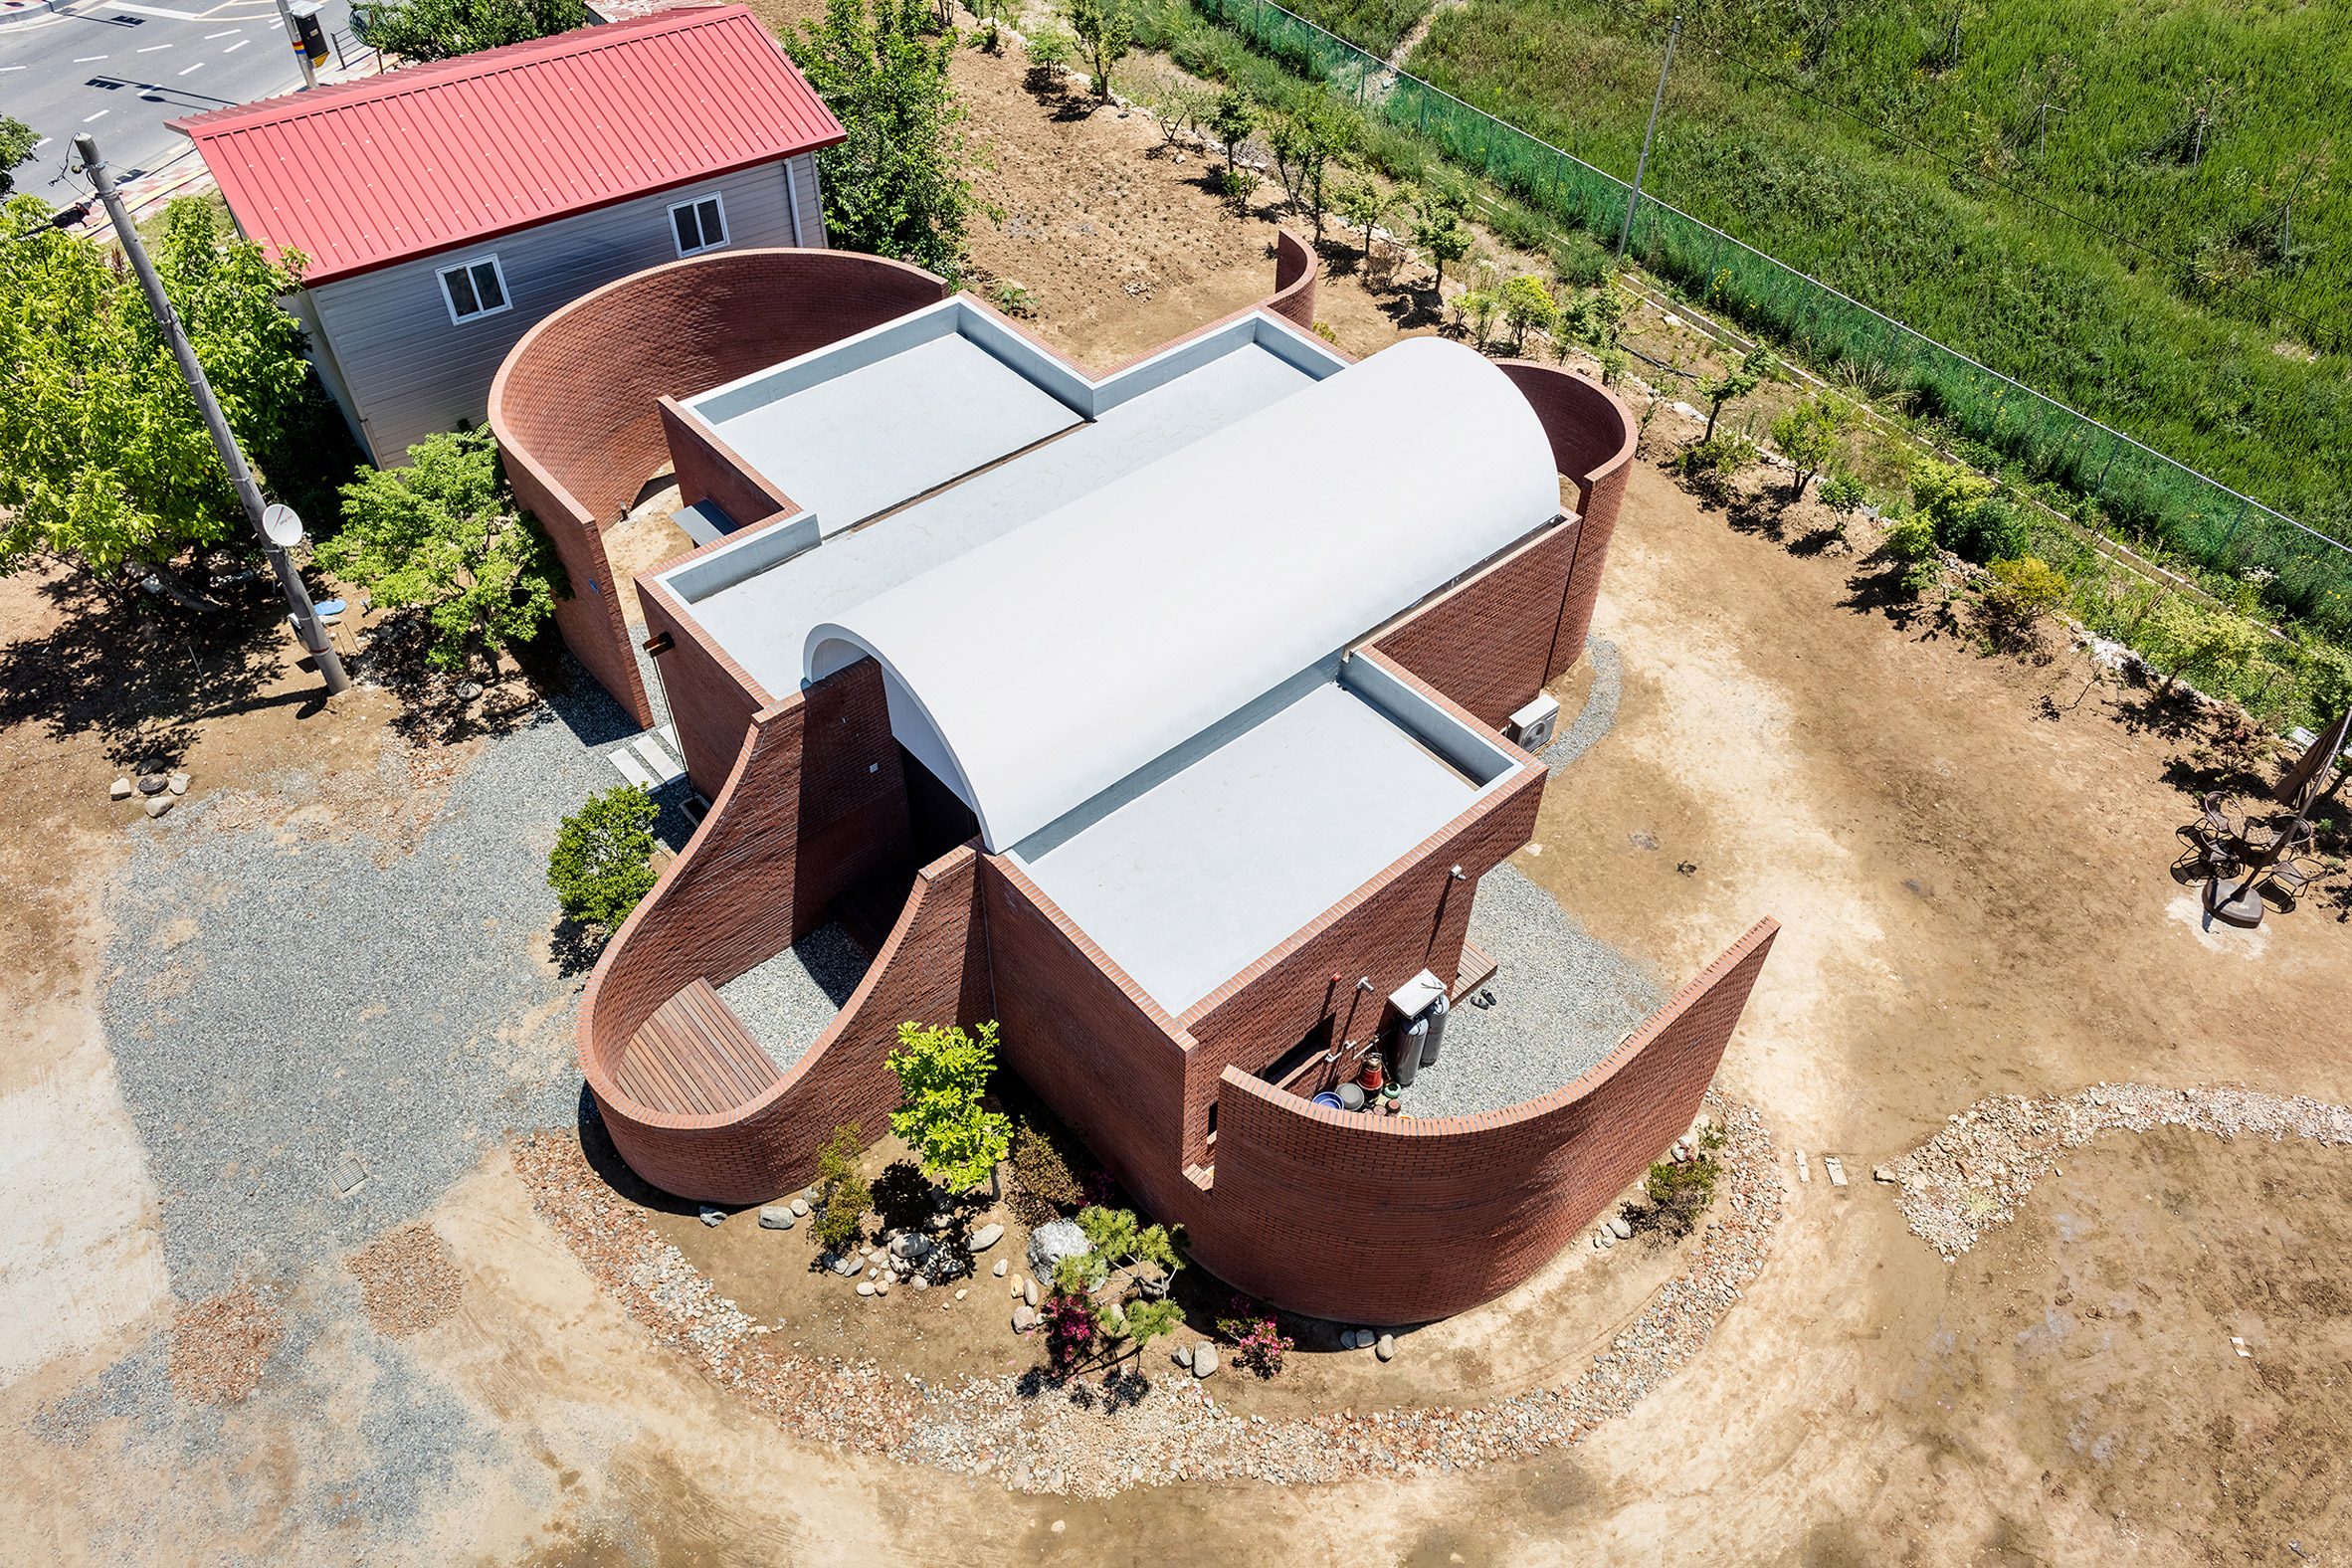 The Vault House by OBBA incorporates hidden gardens behind curving brick walls